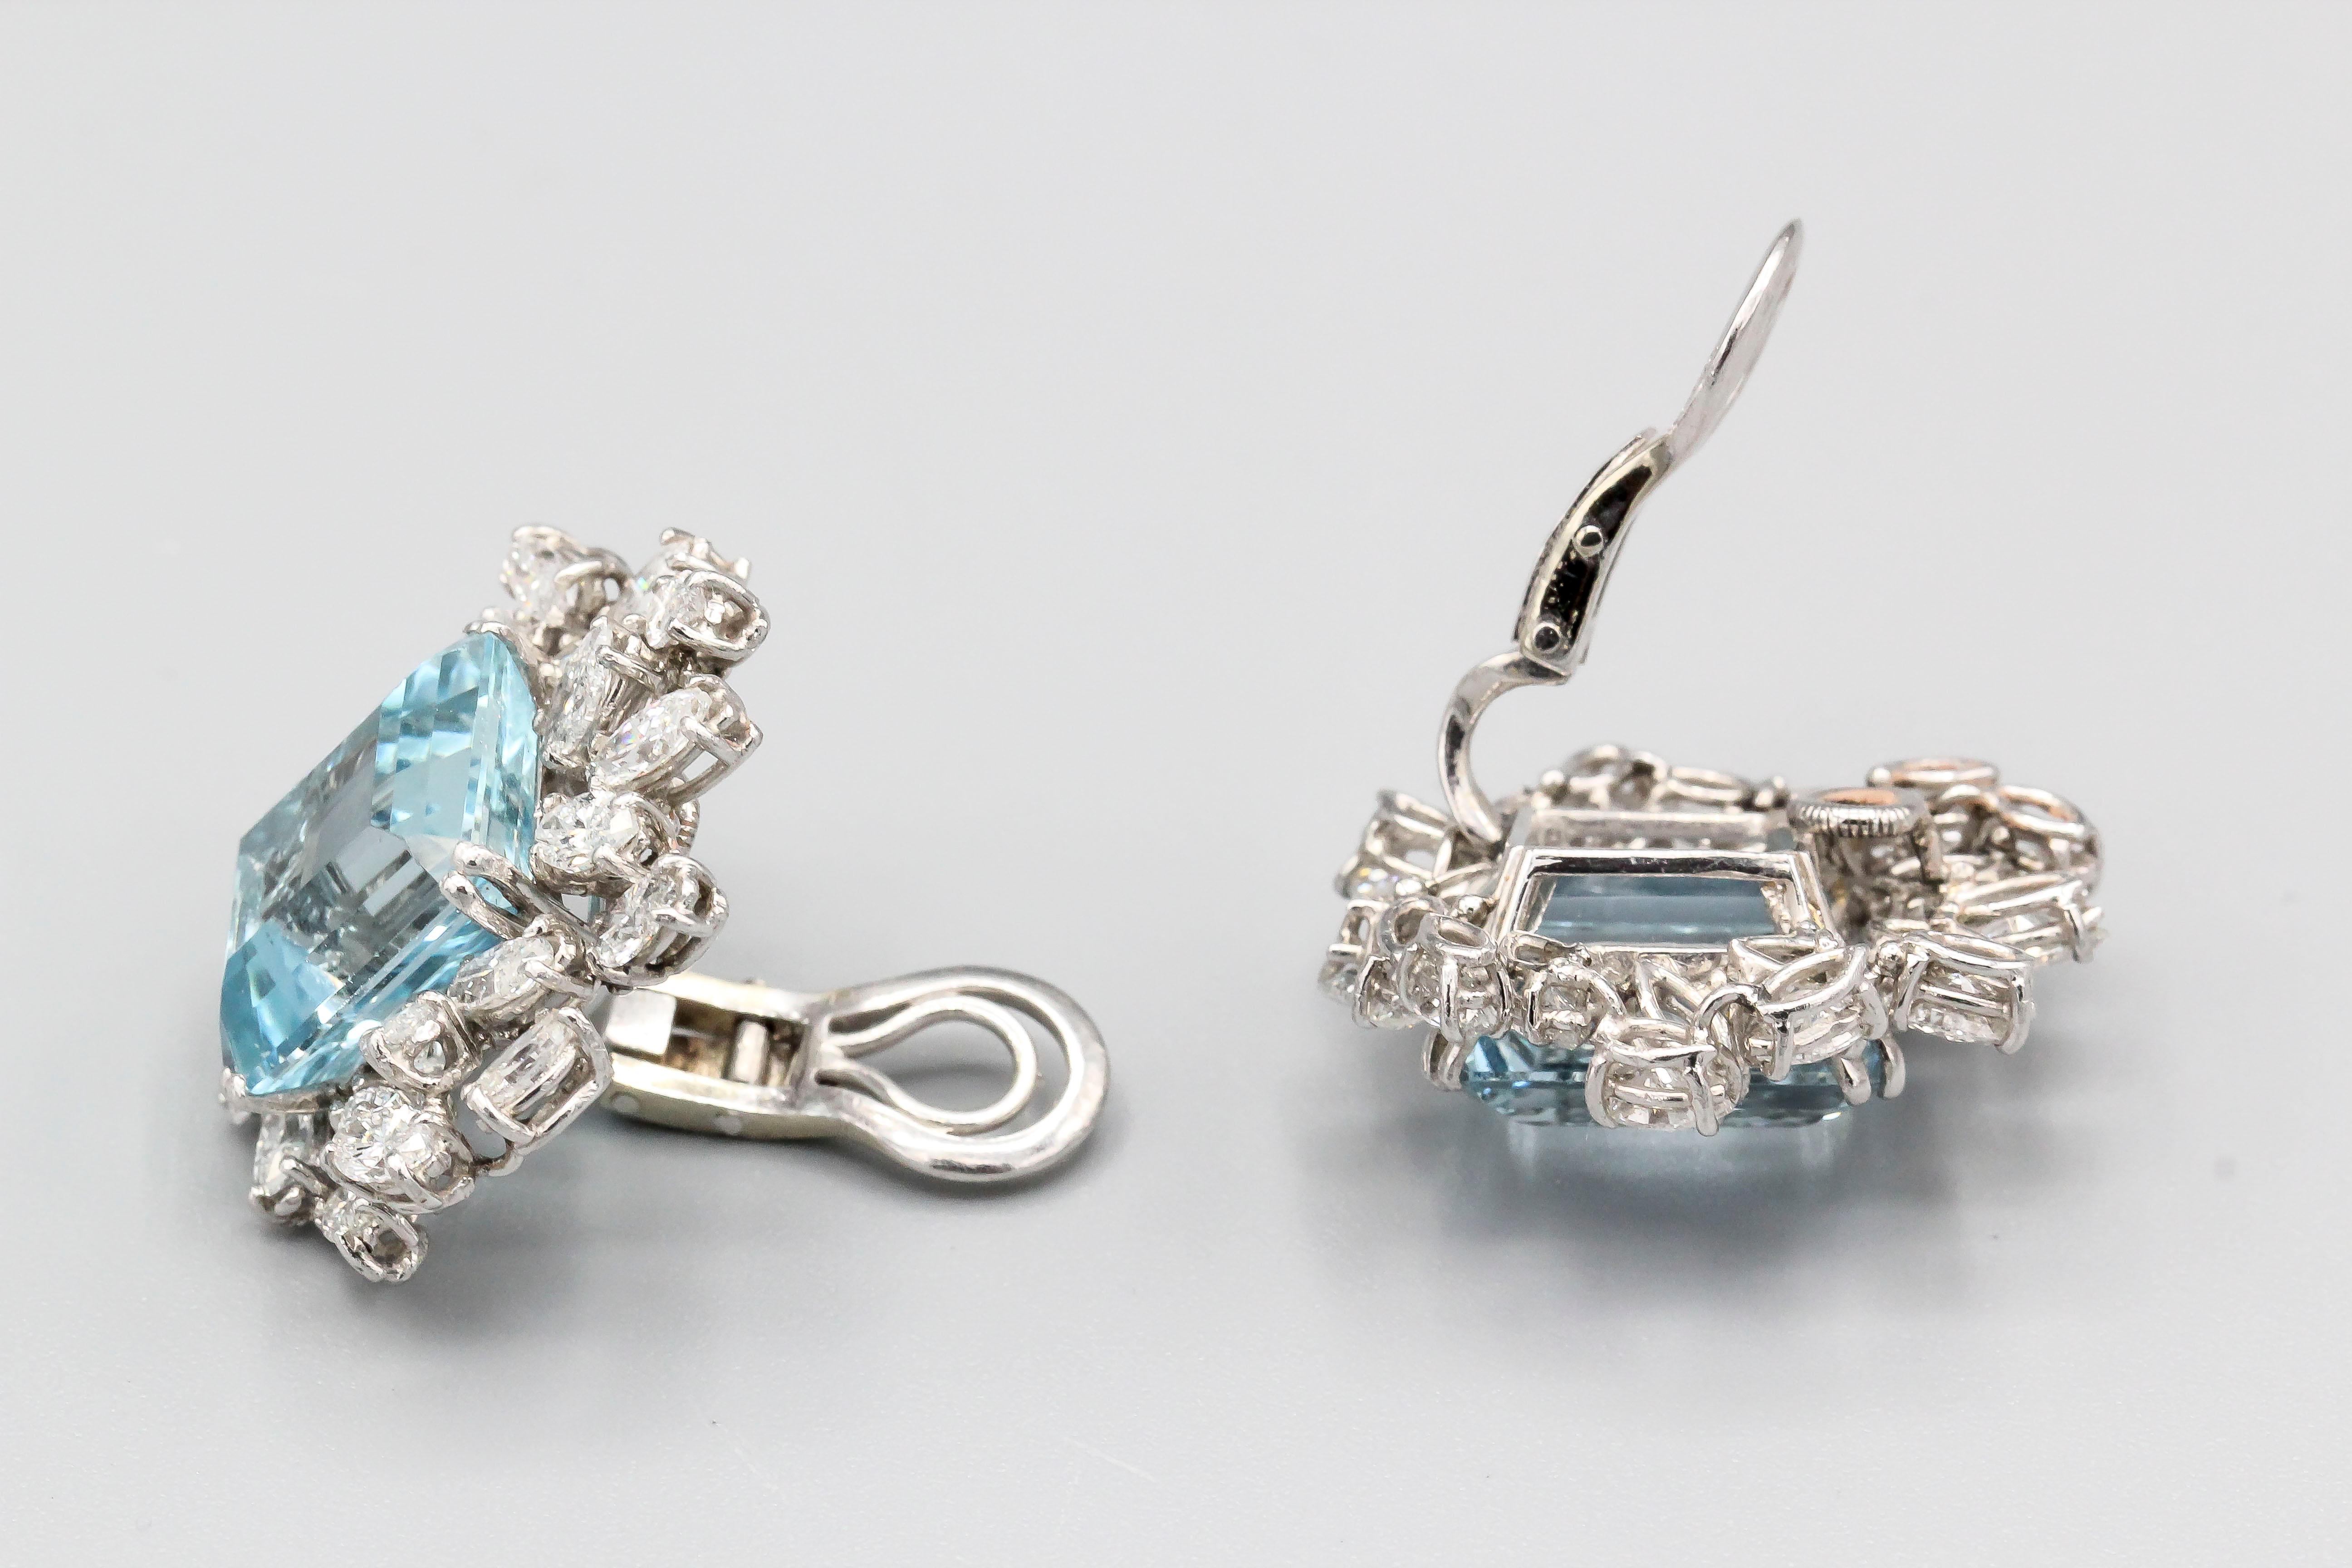 Very fine pair of aquamarine and diamond earrings set in platinum, by Boucheron, circa 1960s-70s.  The earrings feature two fine large aquamarine of approx. 20 carats total weight, further adorned with approx. 7 carats of high grade white marquise